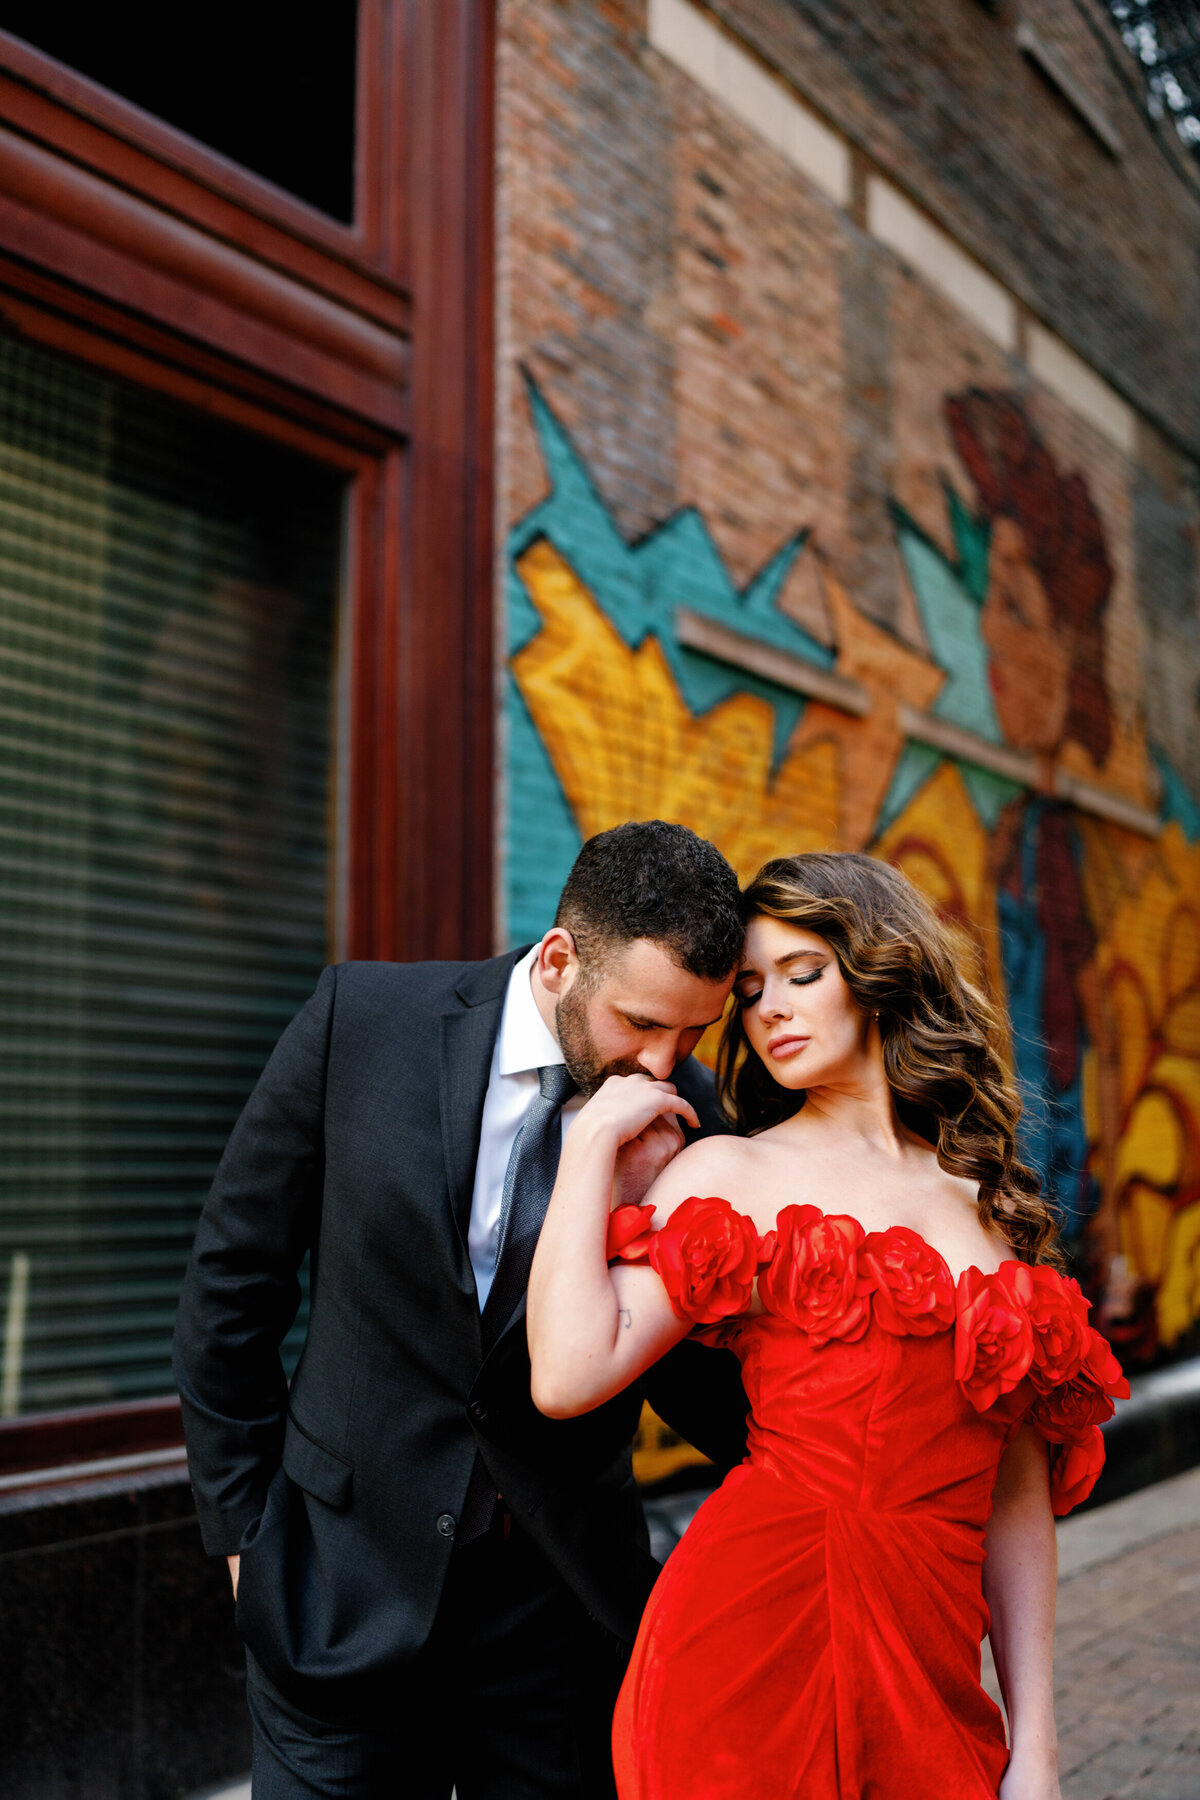 Aspen-Avenue-Chicago-Wedding-Photographer-Union-Station-Chicago-Theater-Engagement-Session-Timeless-Romantic-Red-Dress-Editorial-Stemming-From-Love-Bry-Jean-Artistry-The-Bridal-Collective-True-to-color-Luxury-FAV-97